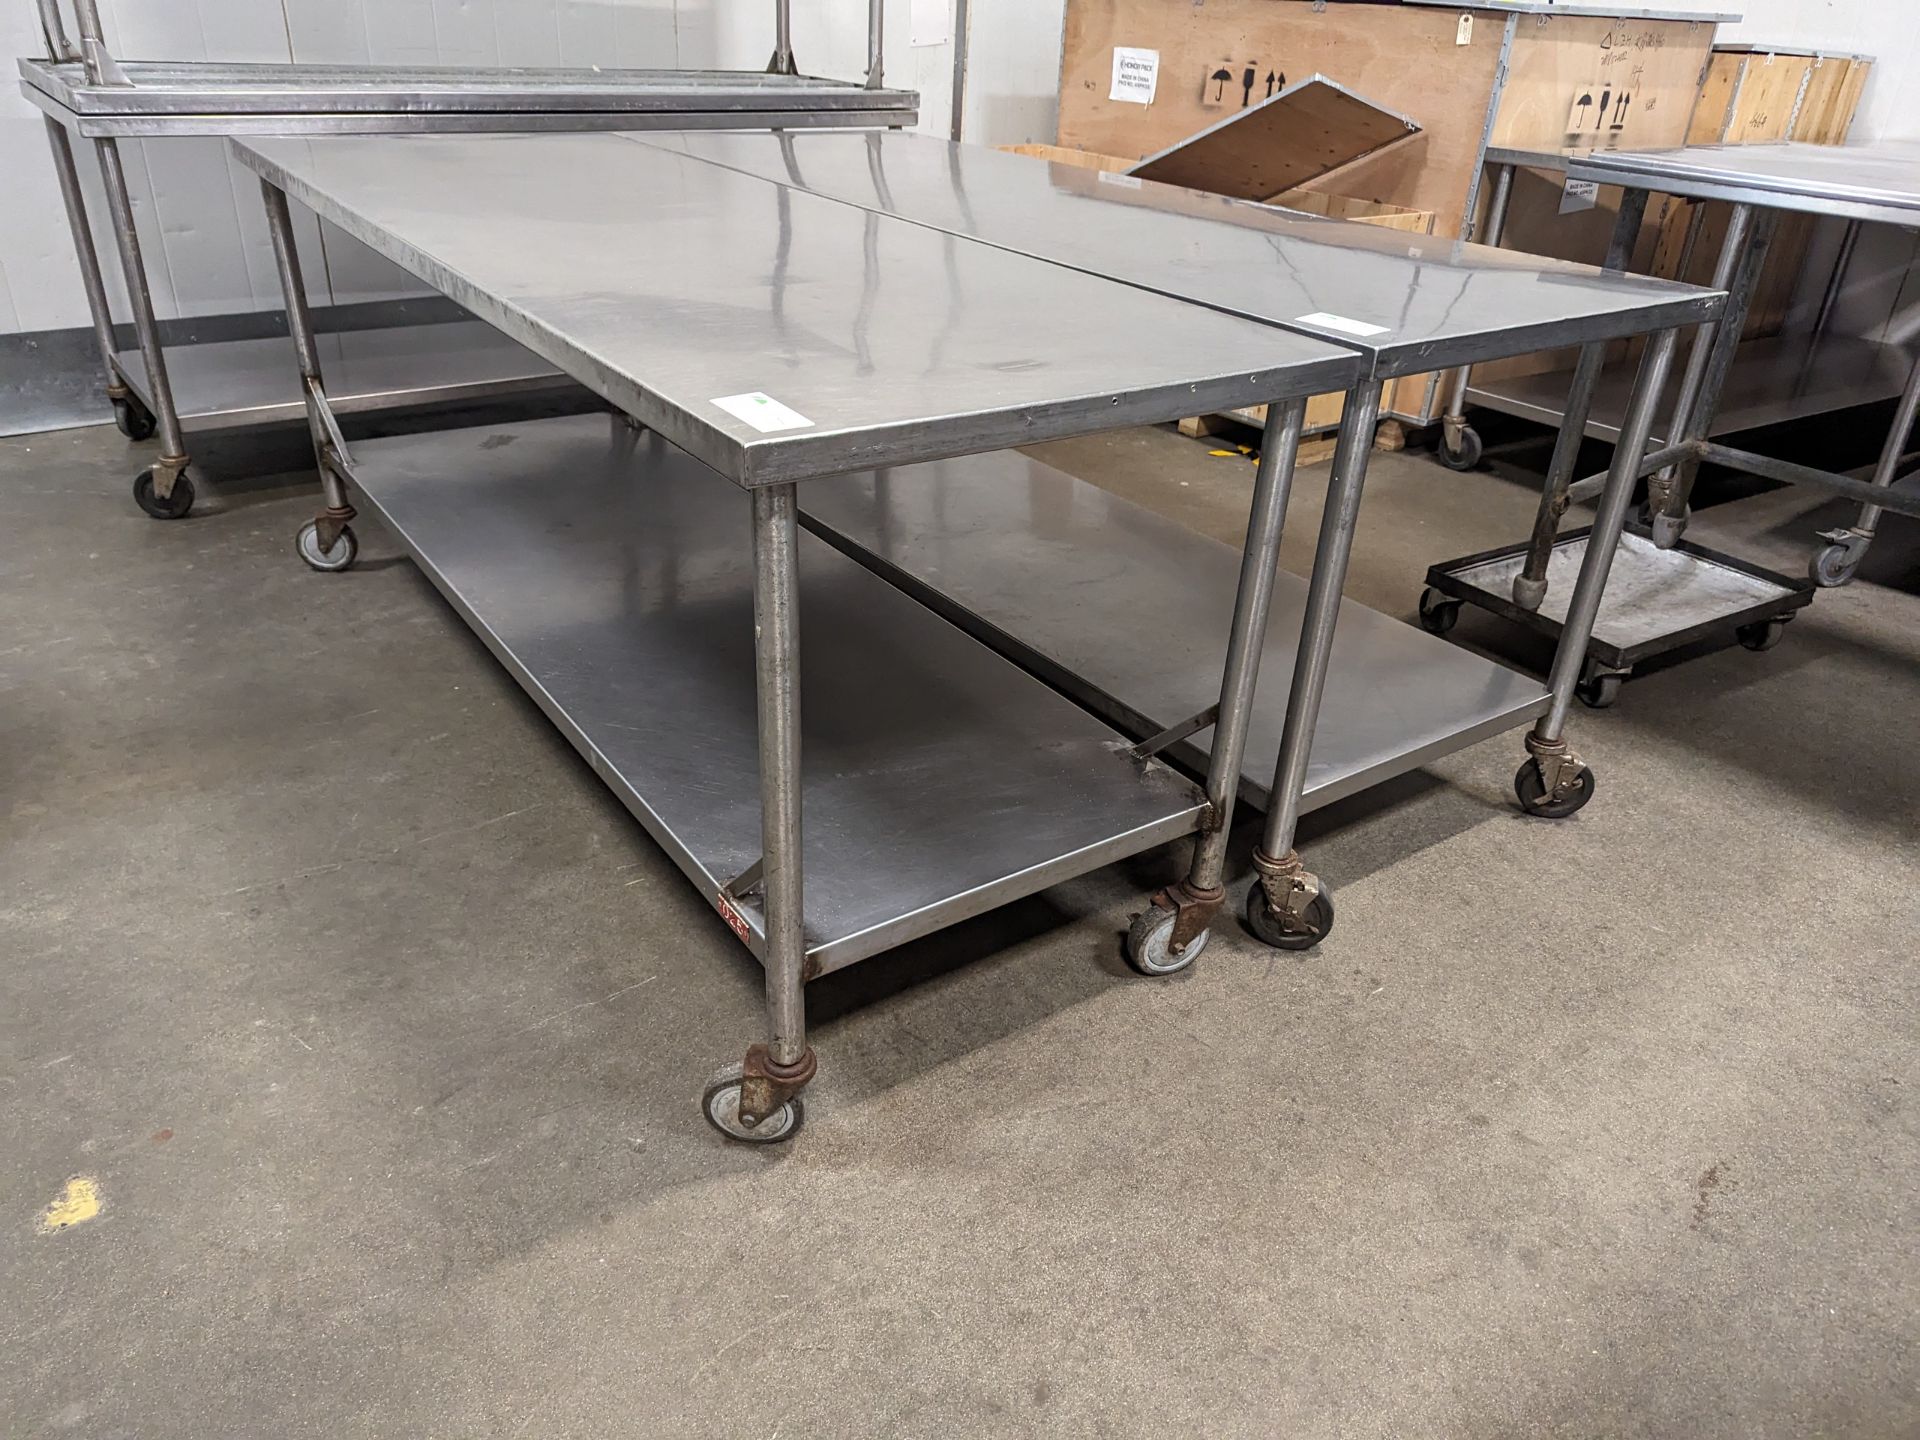 Lot of 2 7ft Long SS Tables, Dimensions LxWxH: 84x30x36 each